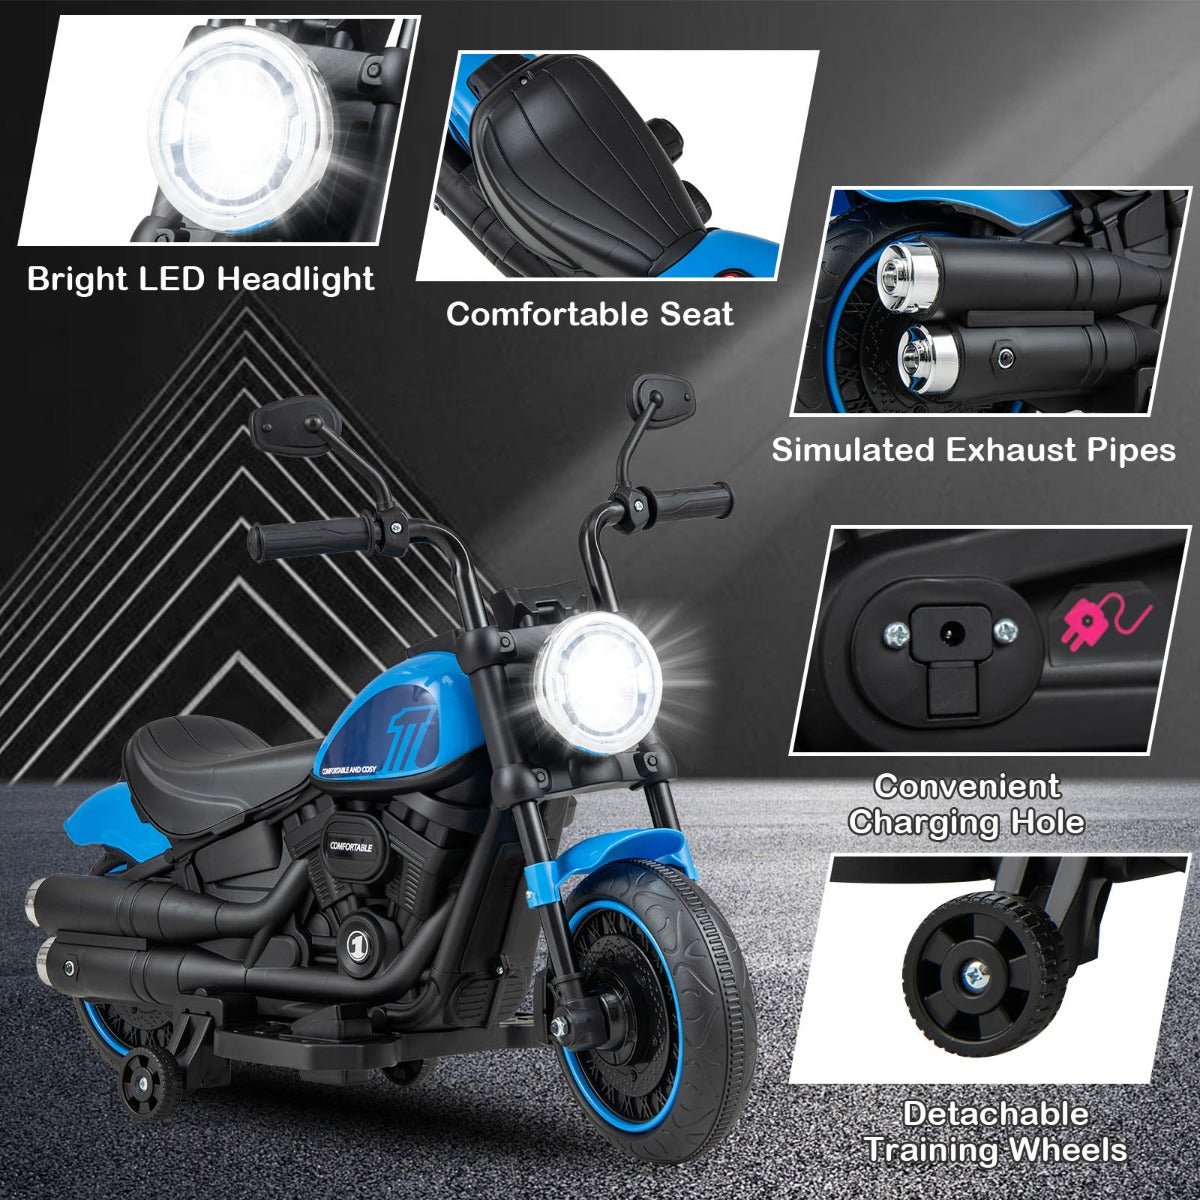 Starlight Racer: Blue Motorcycle with Headlights